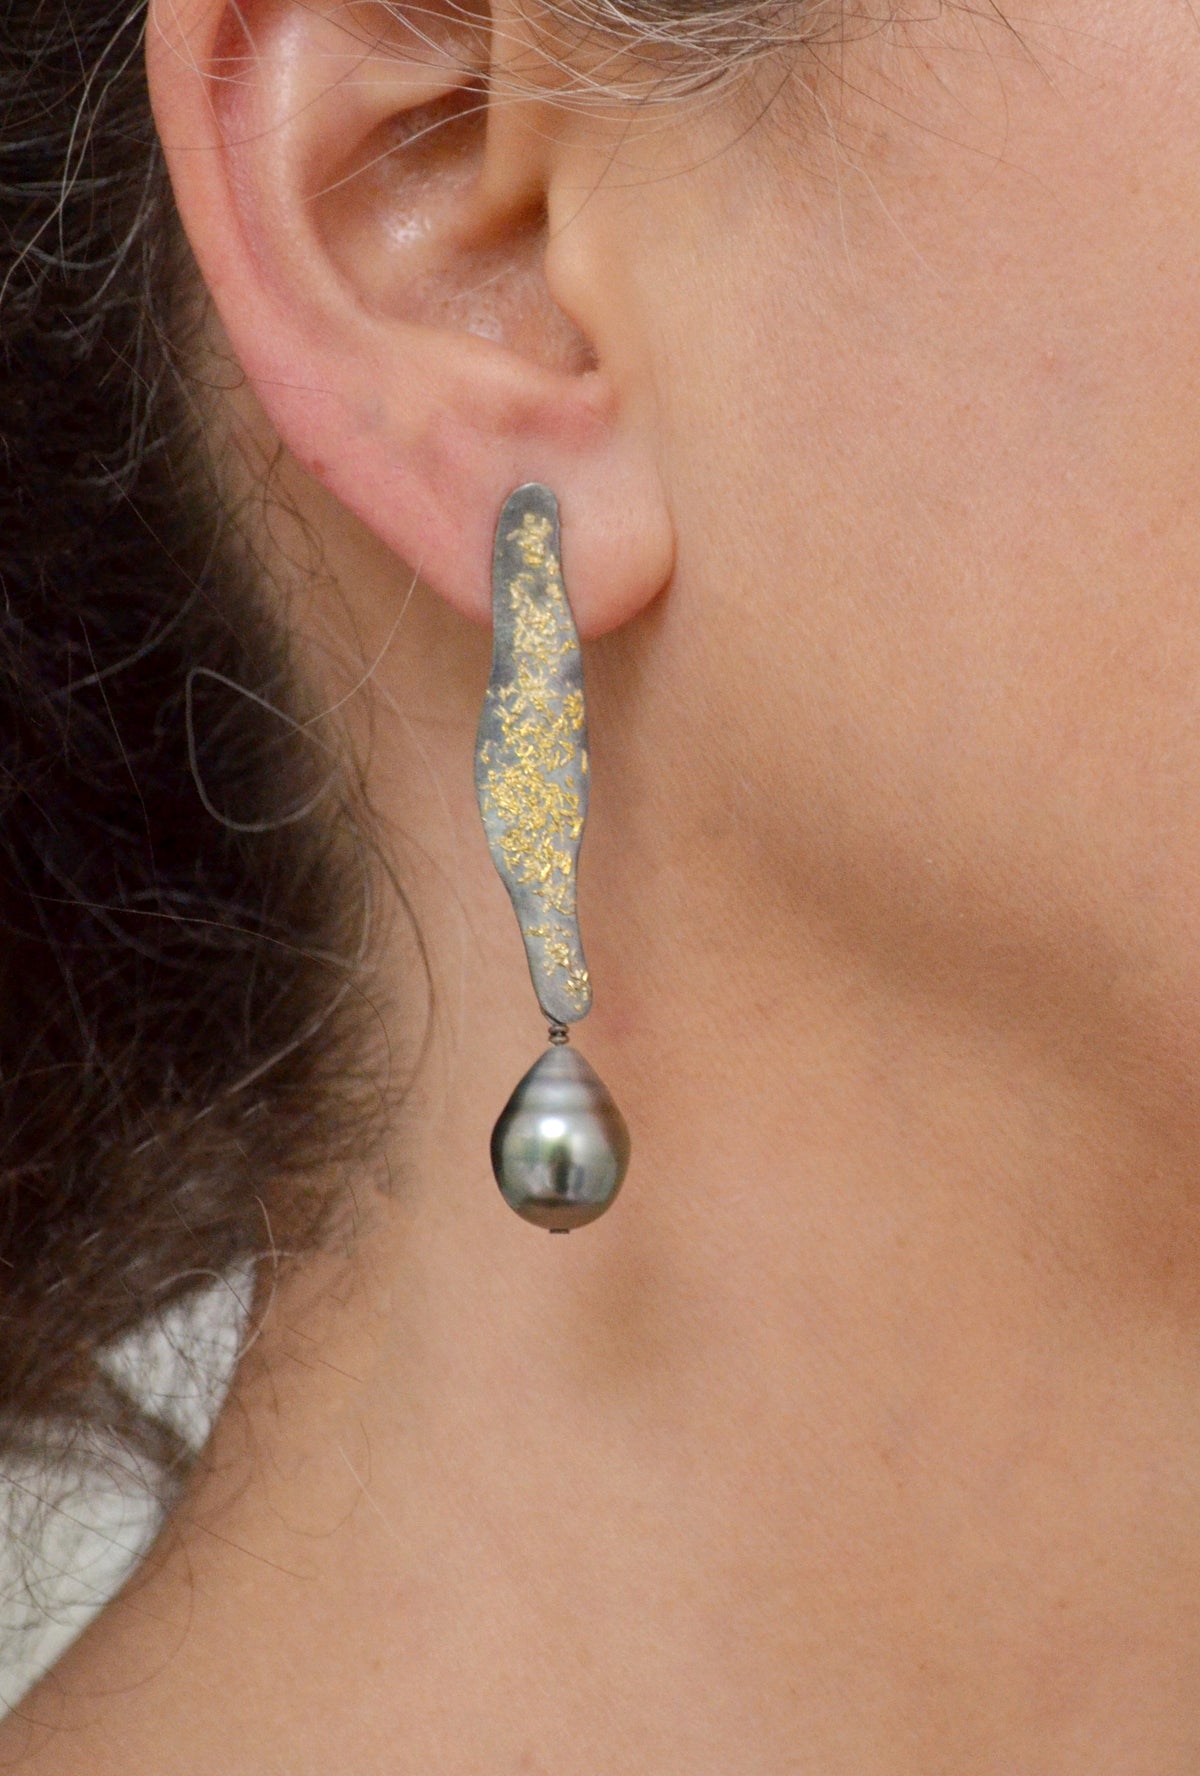 Suzanne Schwartz Wearing Long Earring with Fused 22k Gold